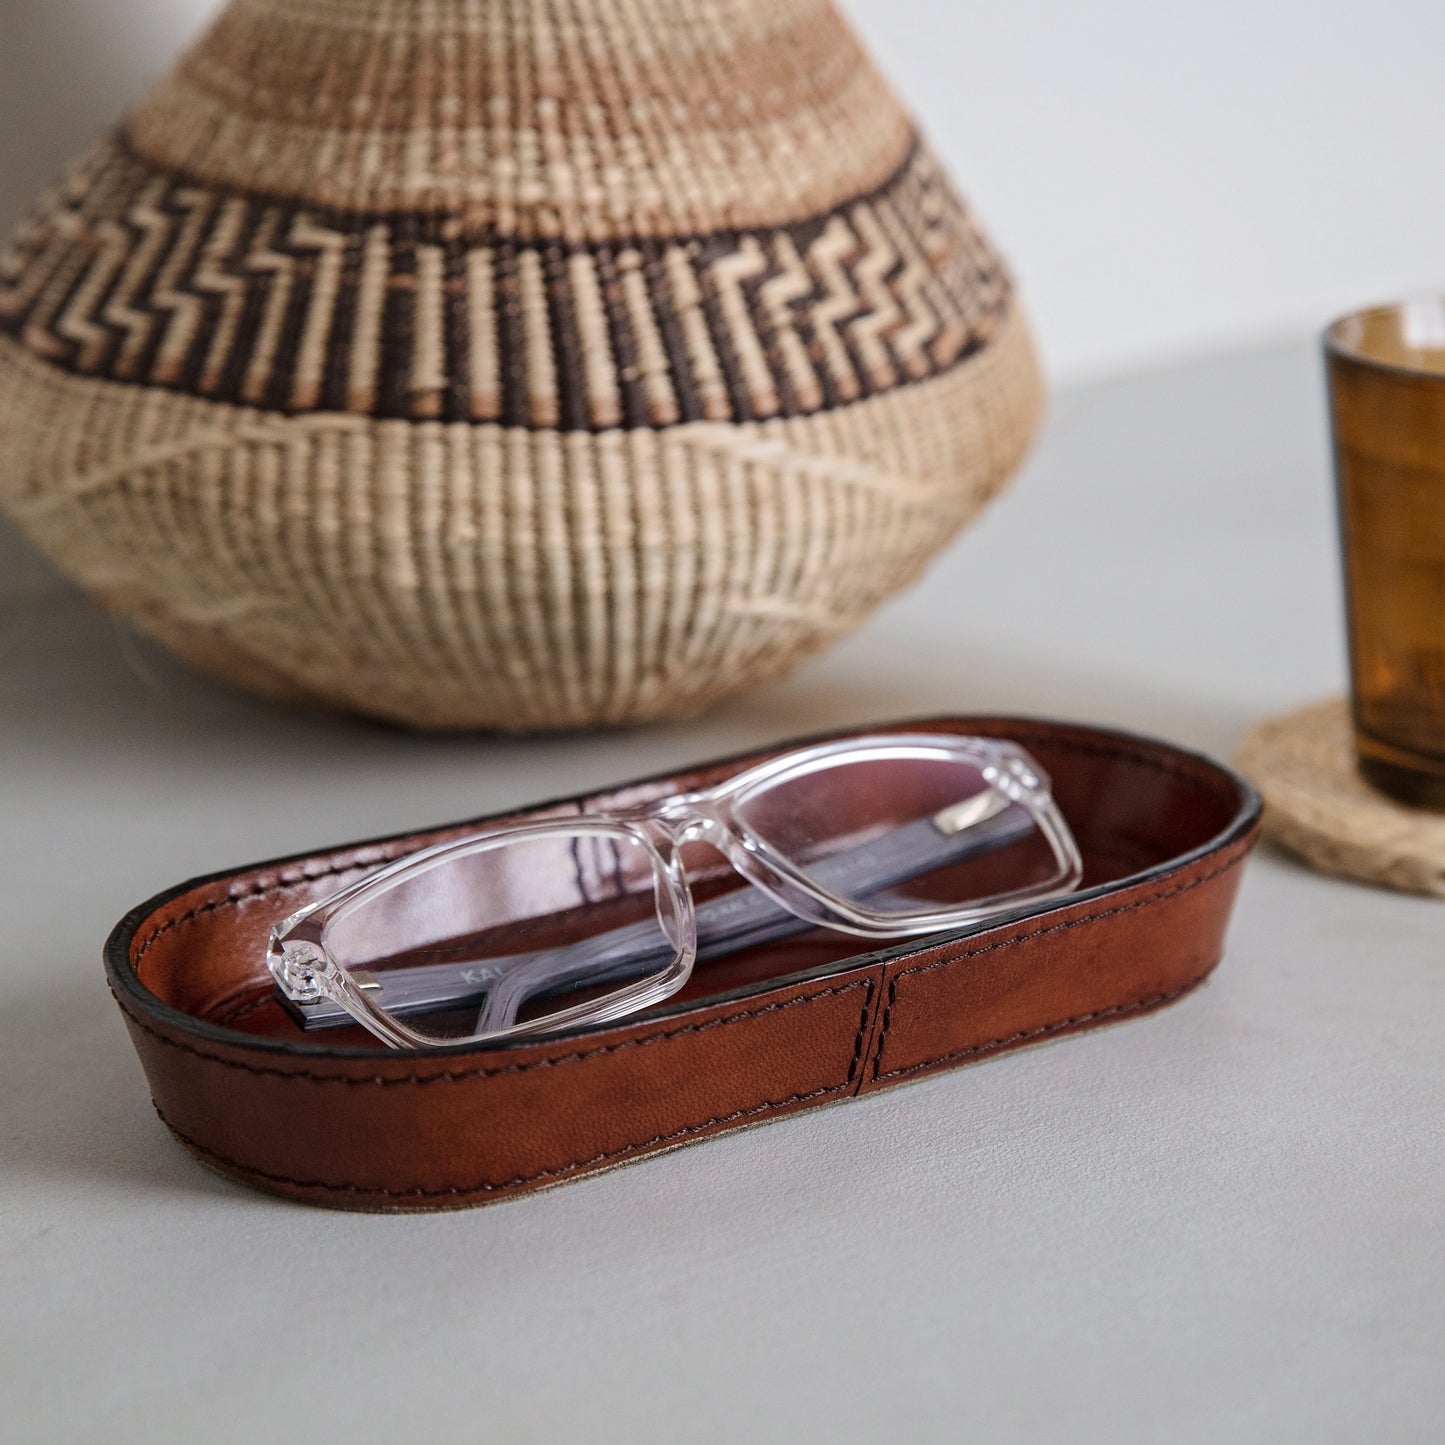 Soft, oval leather tray for glasses to use on the desk or bedside table. Handmade in tan leather and part of a collection of stylish desk and home accessories, that make thoughtful gifts for Father’s Day or a new home.